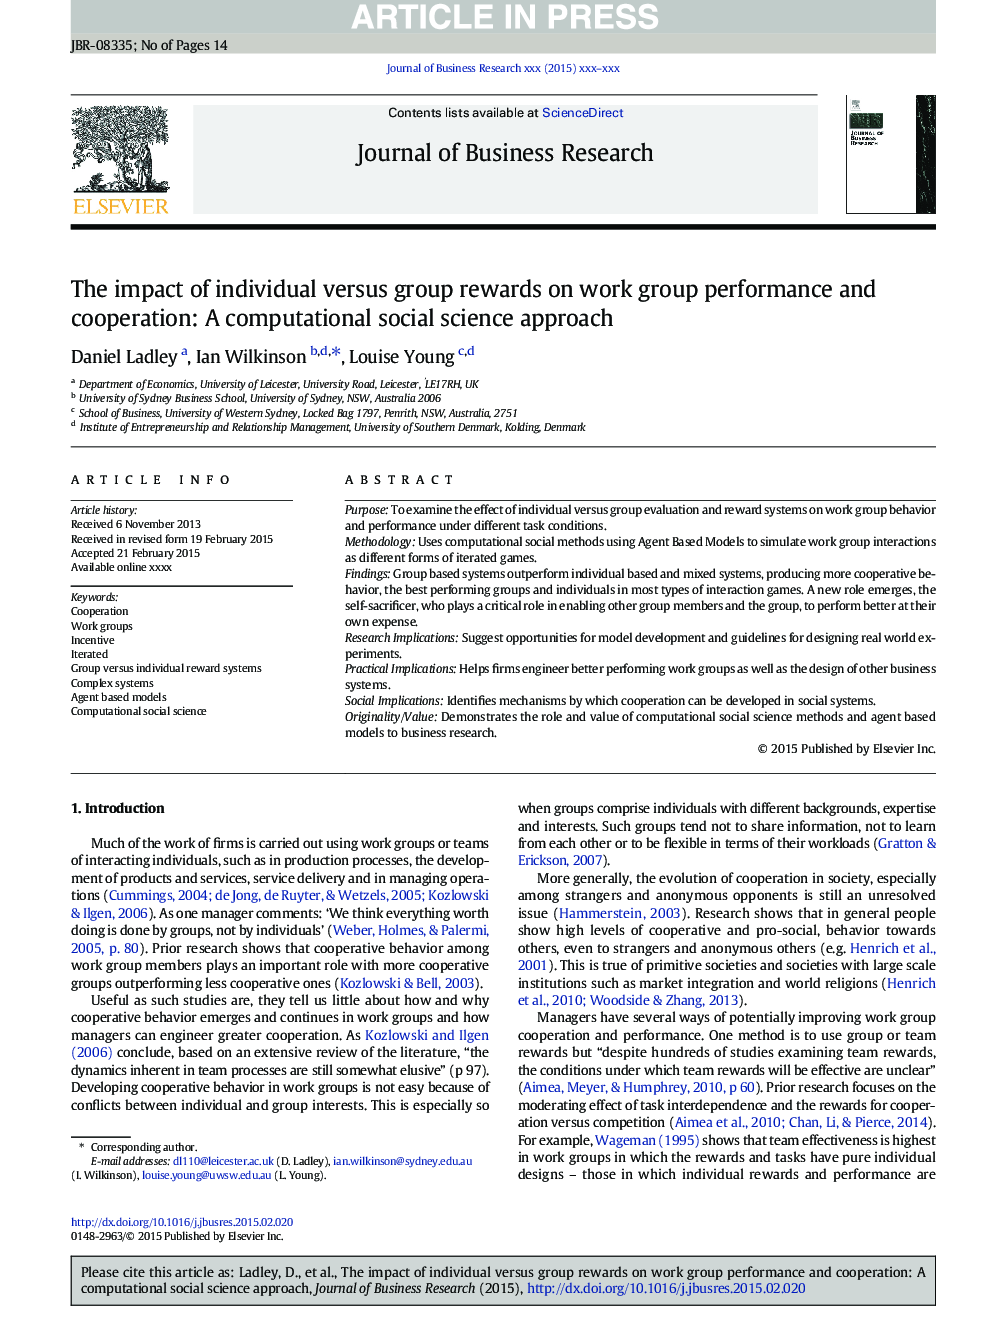 The impact of individual versus group rewards on work group performance and cooperation: A computational social science approach